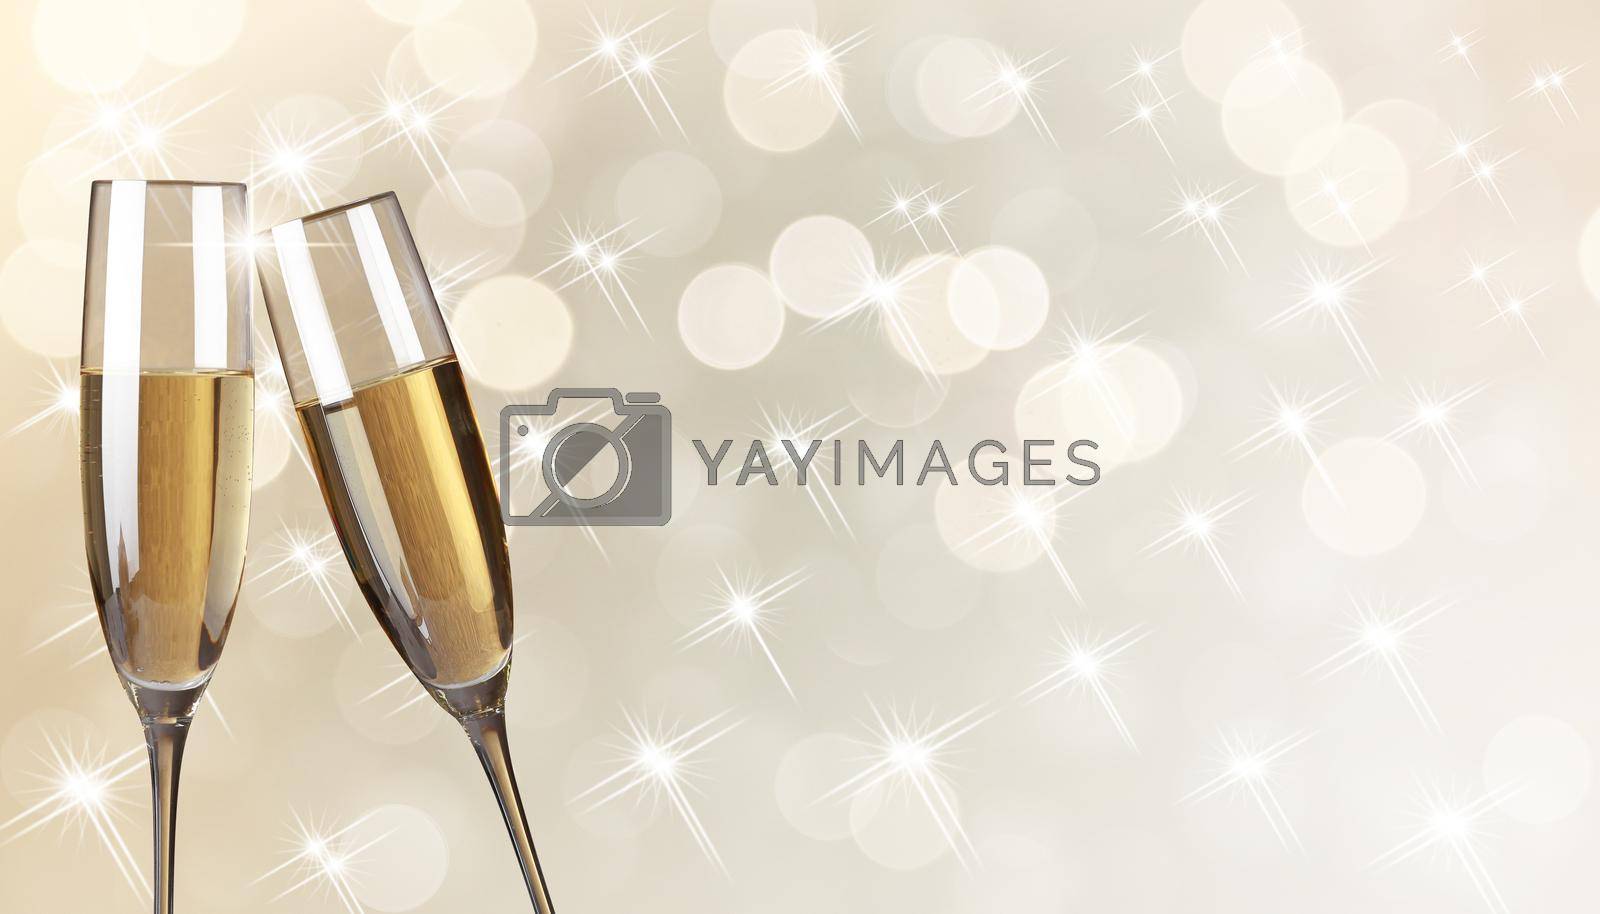 Royalty free image of New years eve celebration background with champagne by Taut